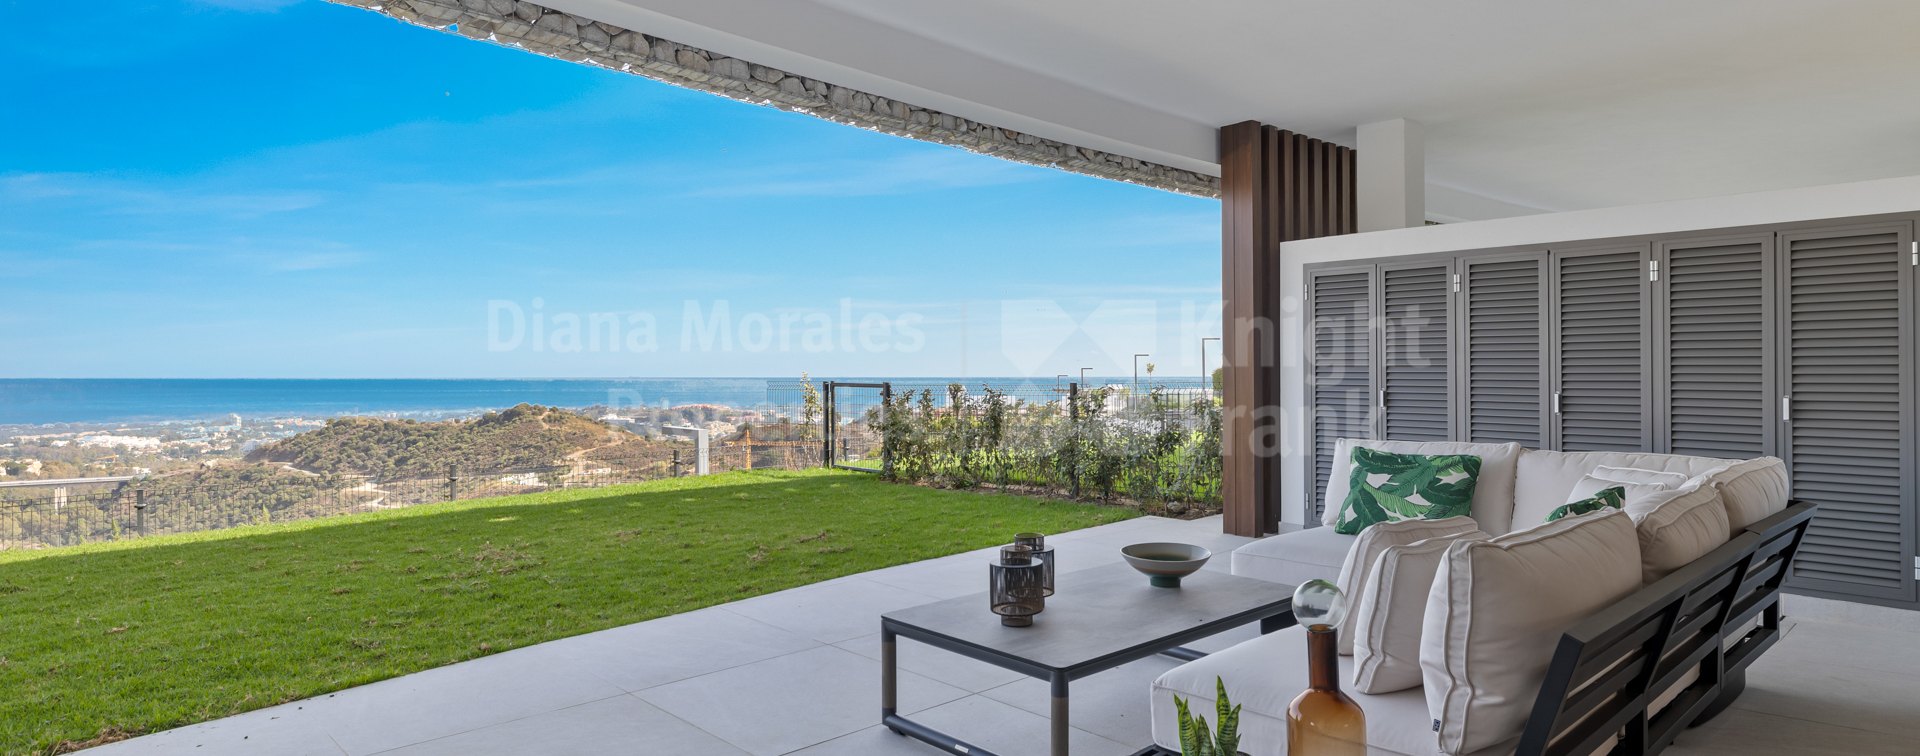 Real de La Quinta, Flat with private garden and panoramic views